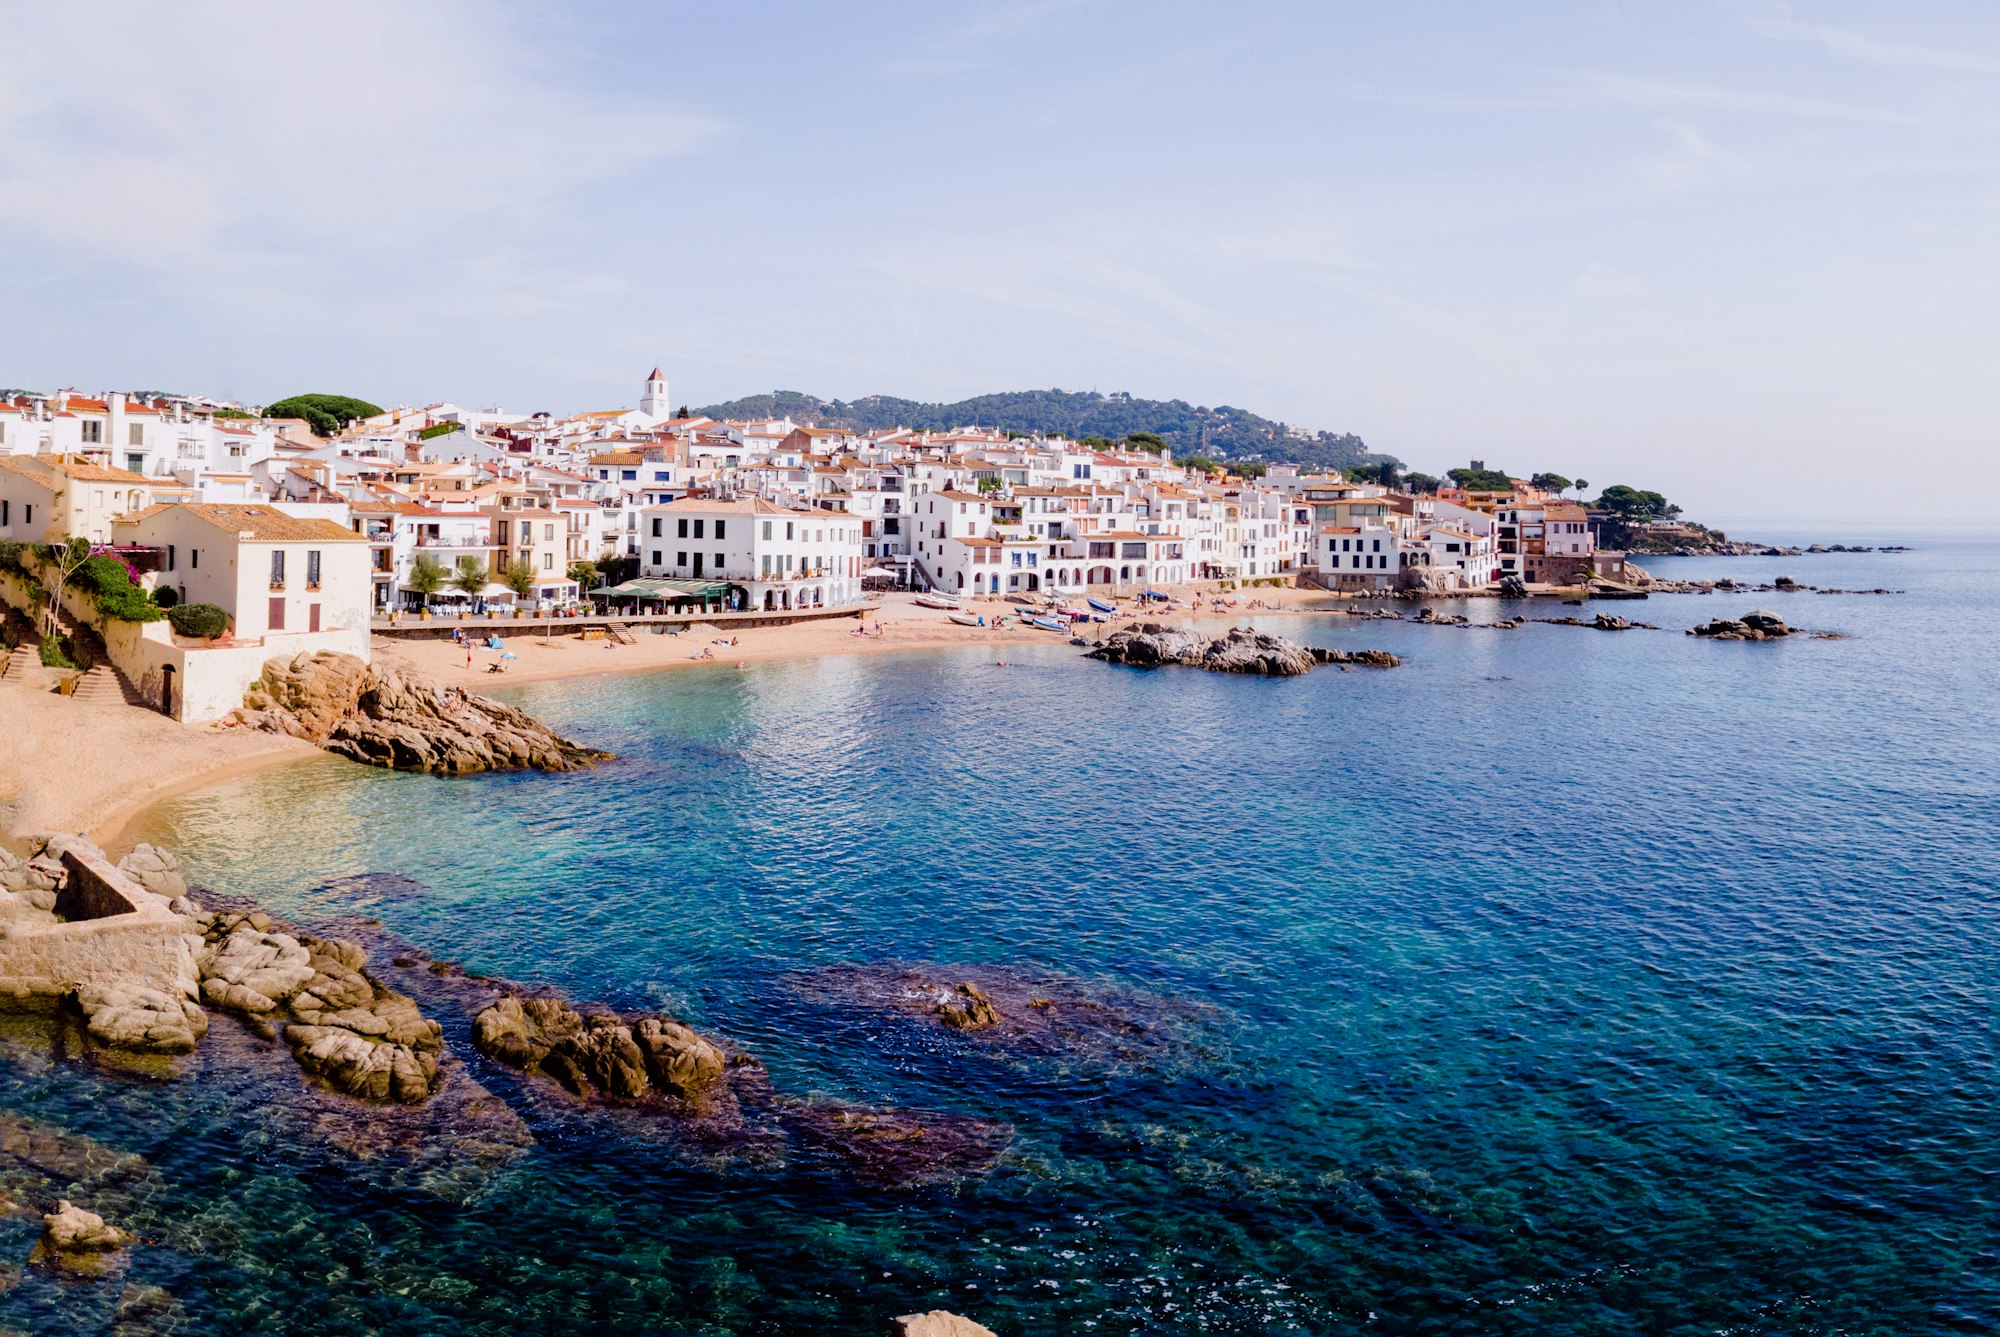 Calella de Palafrugell, nice aerial view of the Costa Brava on the beach with tourists summering.